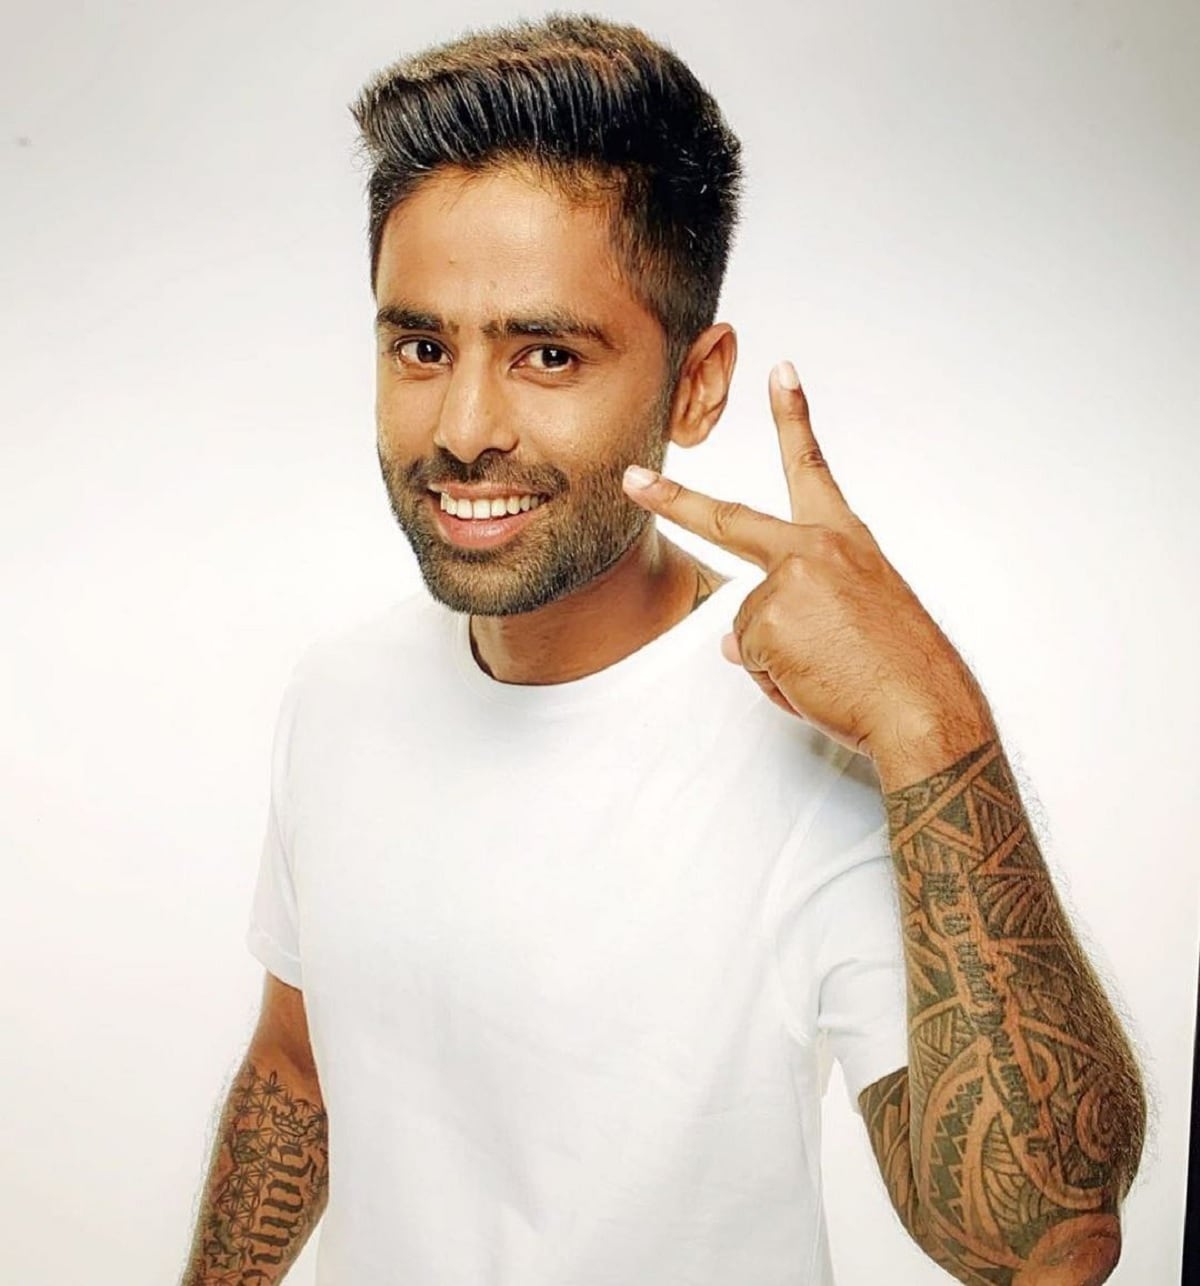 India cricketers eye catching tattoos